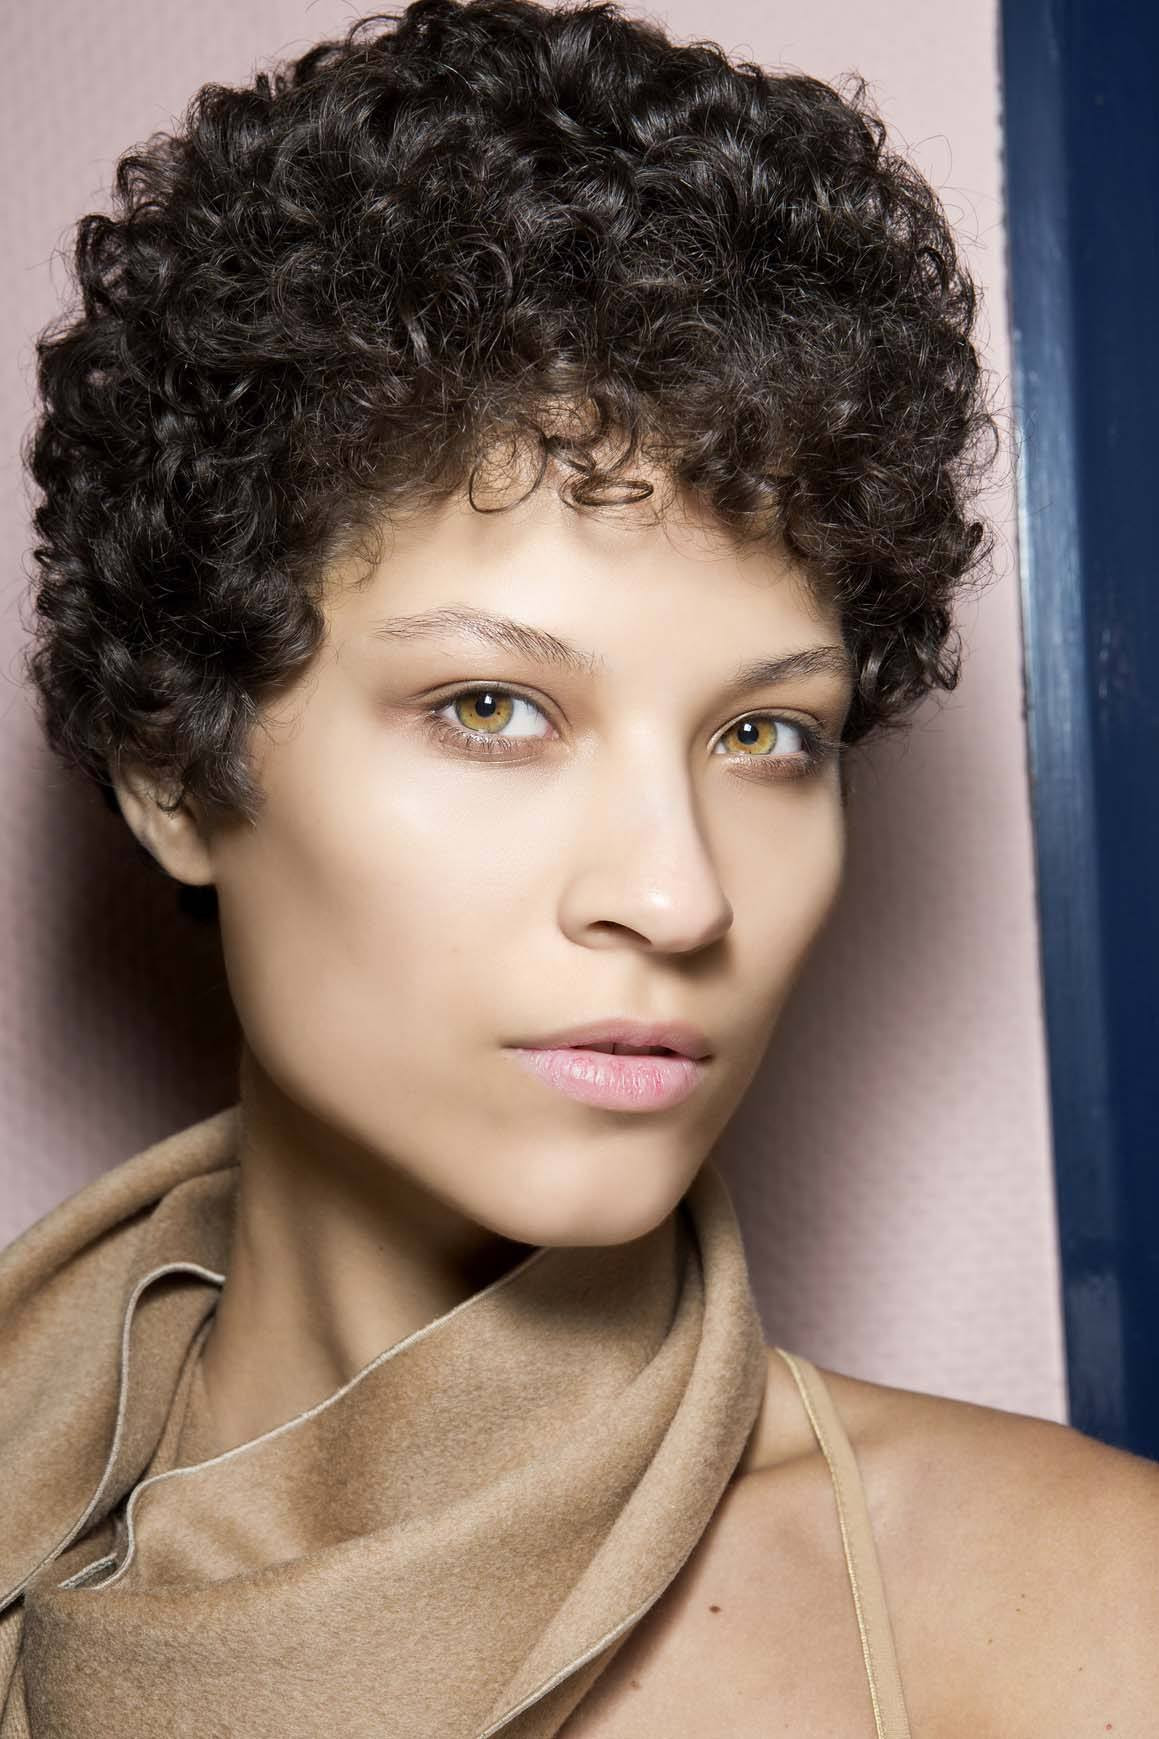 Short Androgynous Haircuts
 6 Androgynous Short Hairstyles To Try This Year